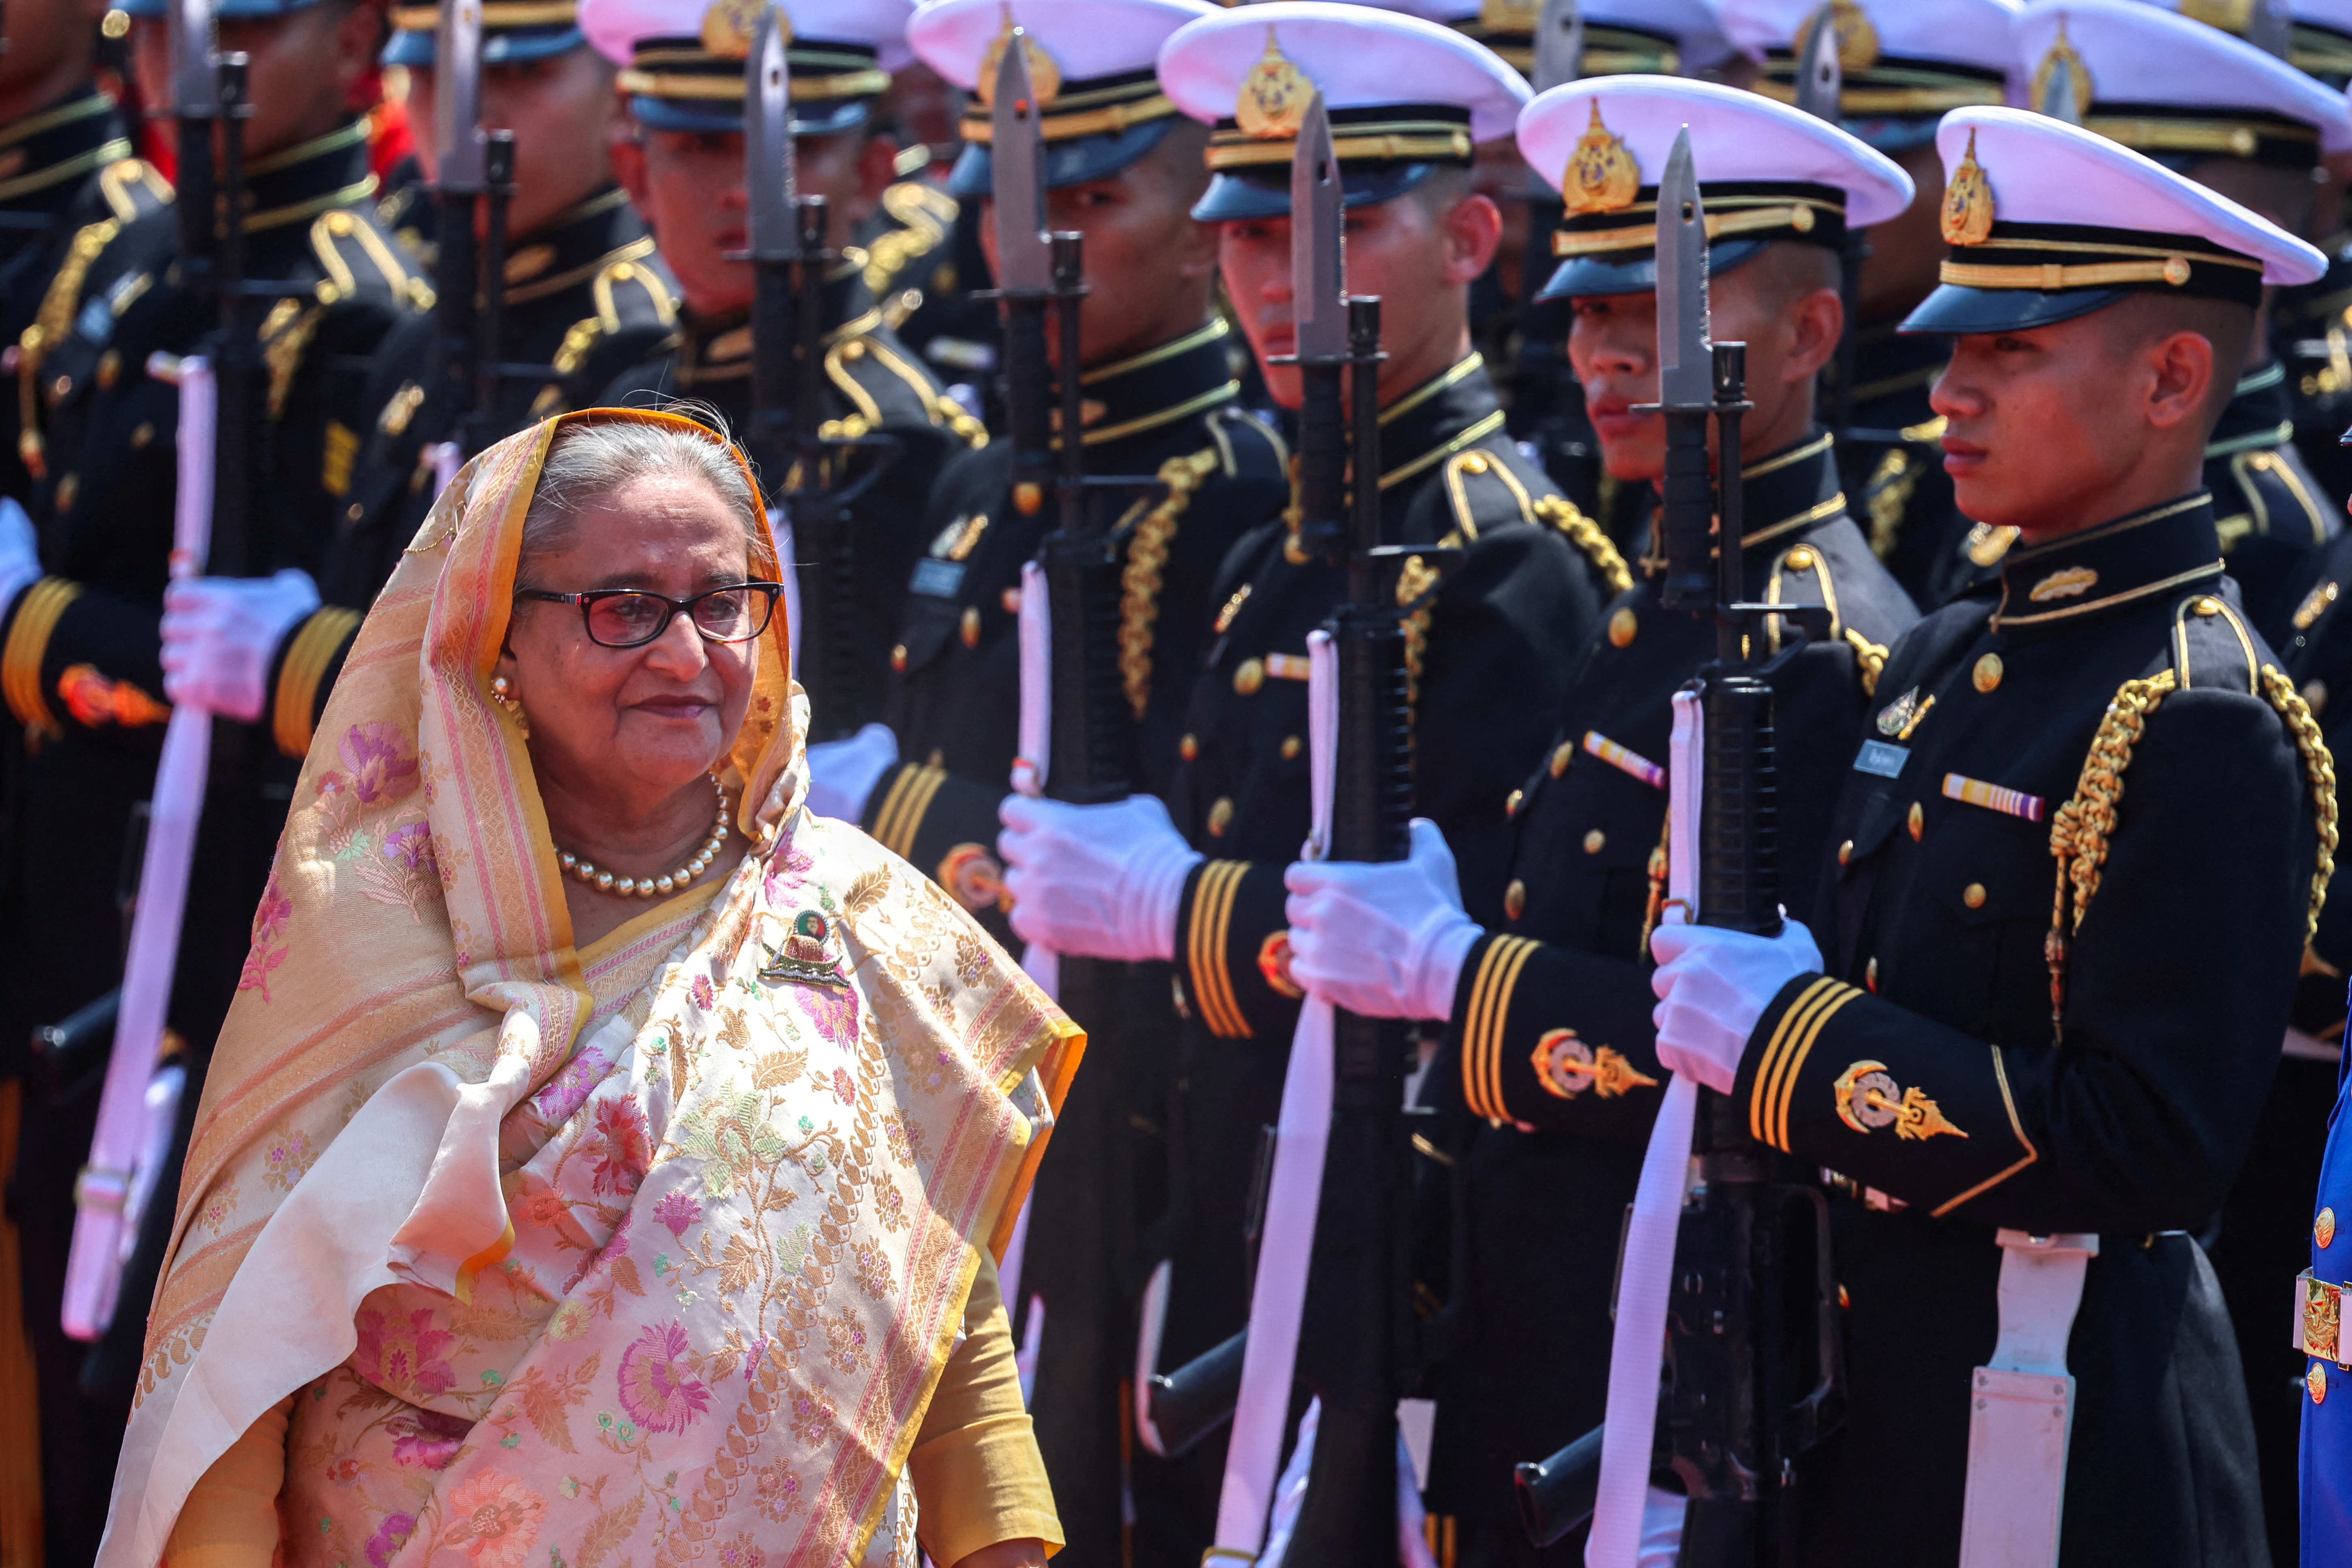 Bangladesh PM Hasina has resigned and left the country, media reports say